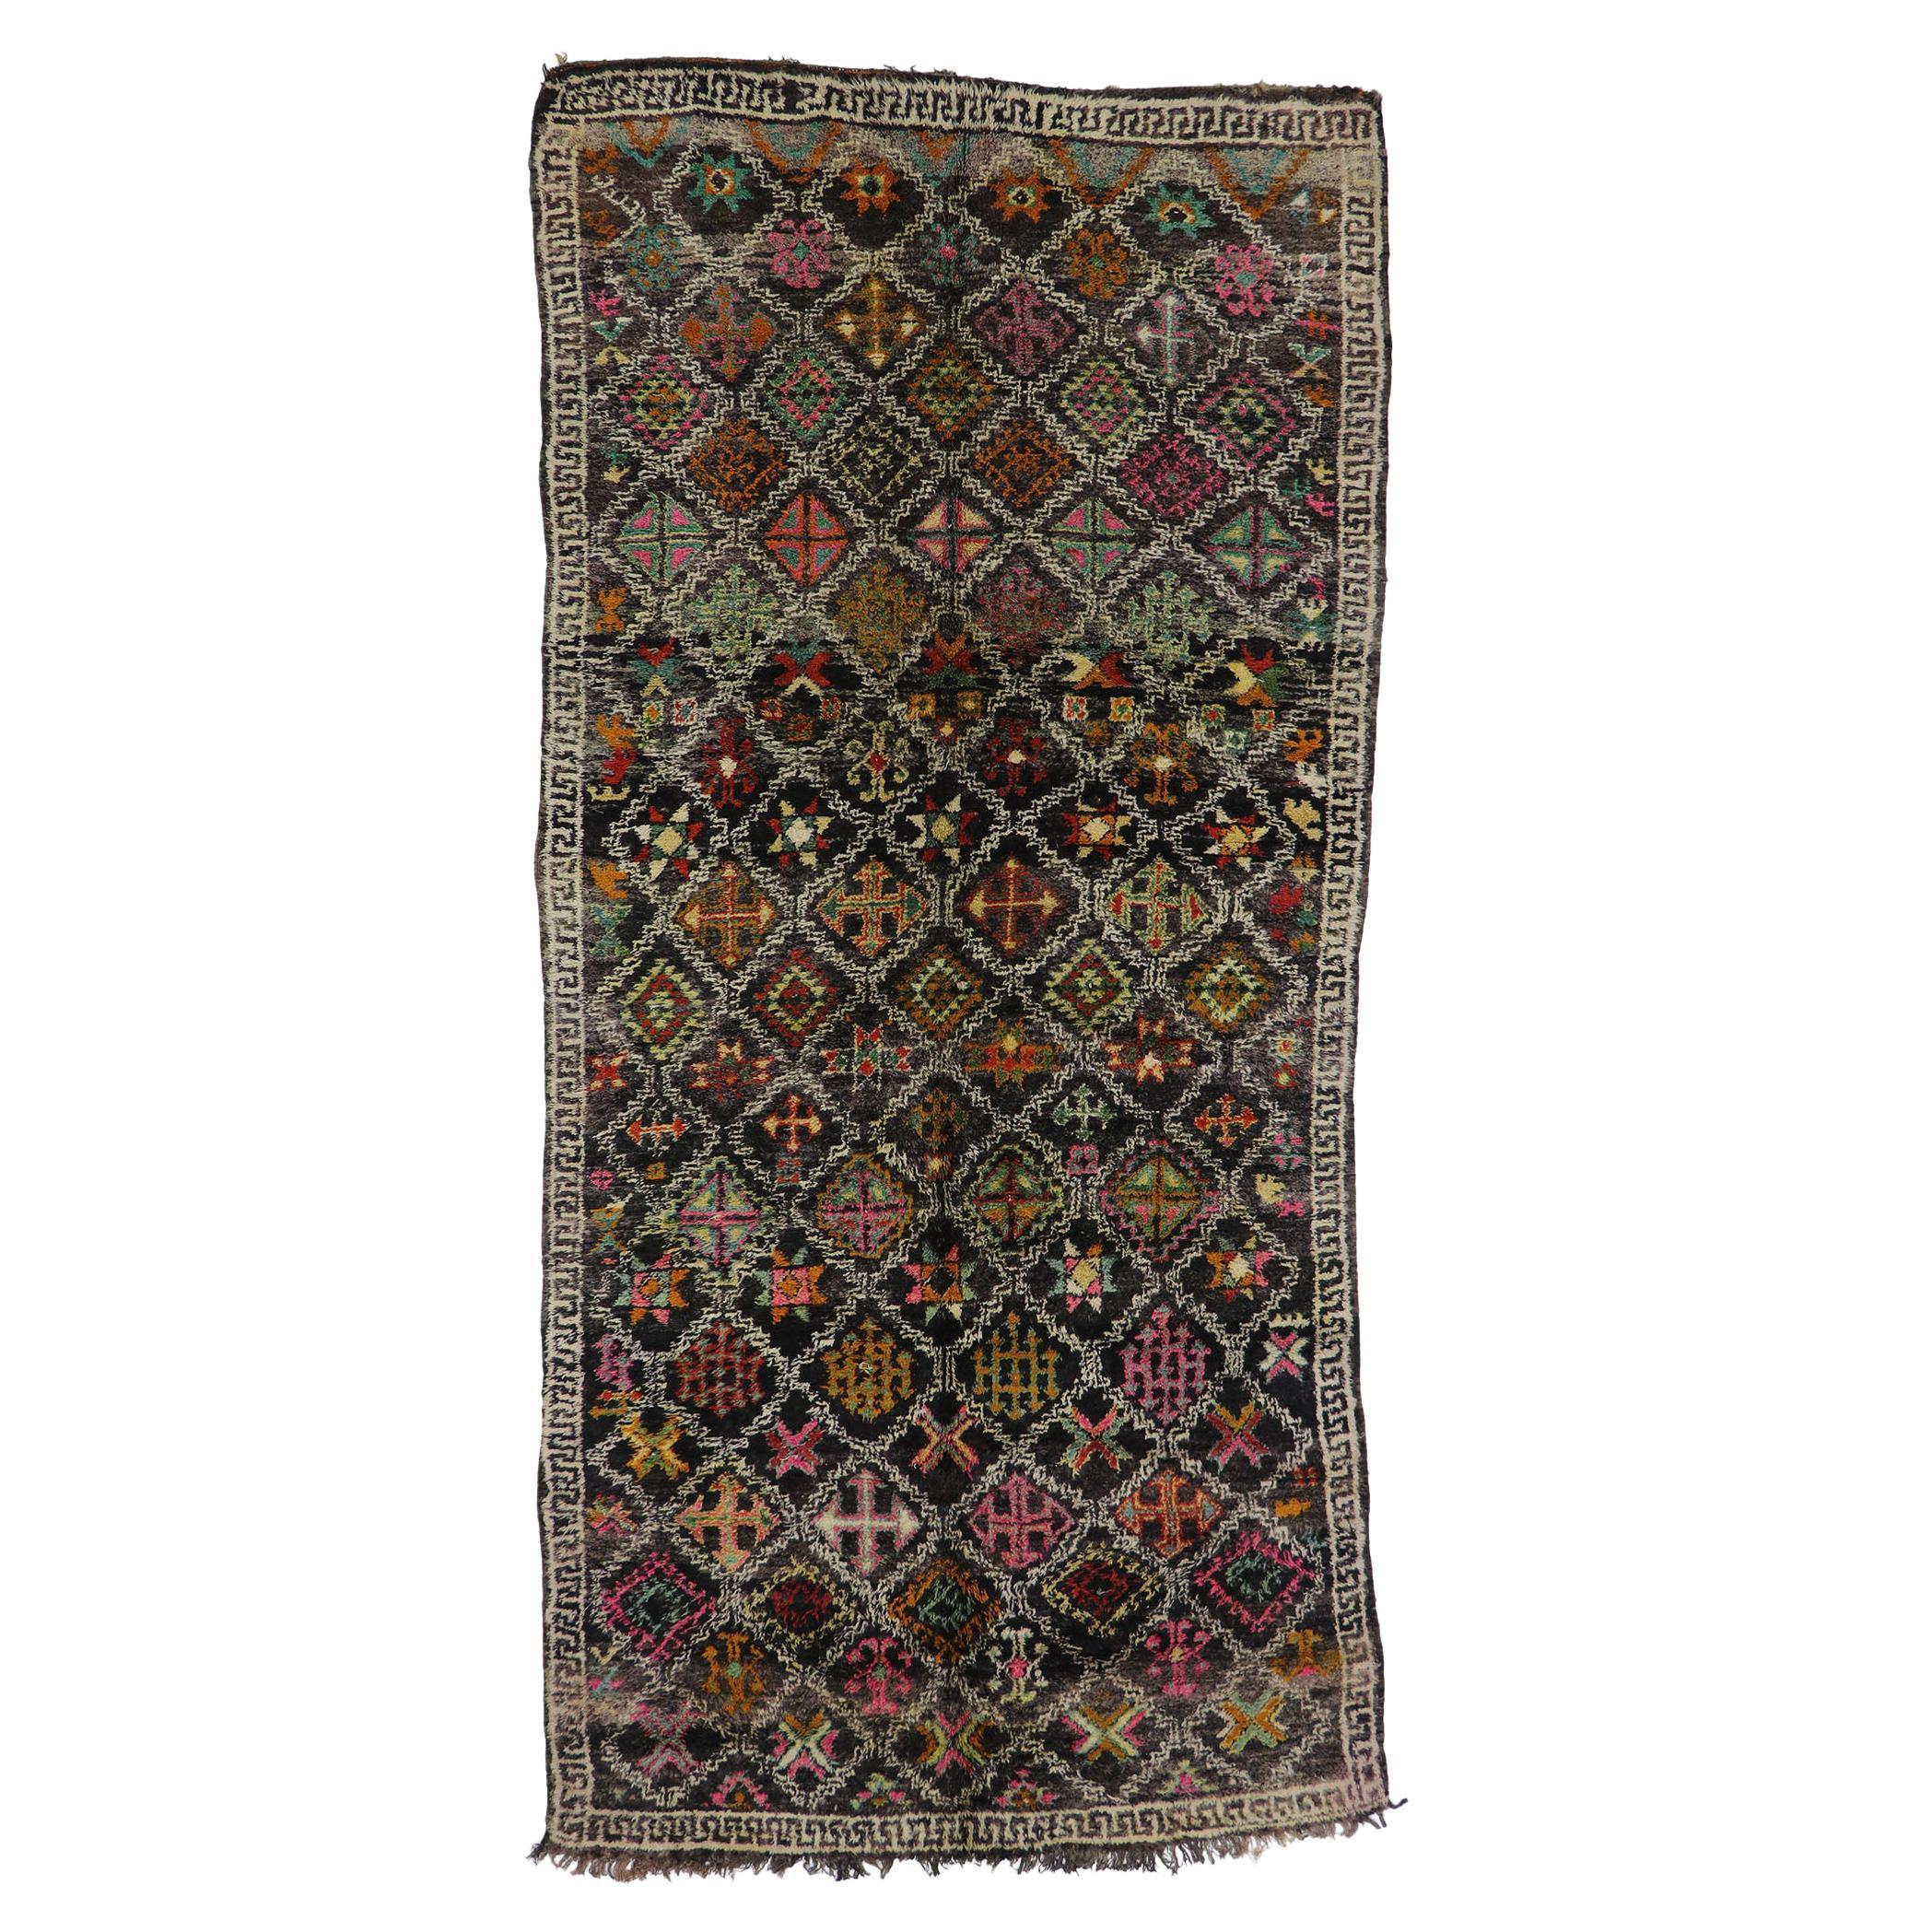 Vintage Berber Boujad Moroccan Rug with Tribal Boho Chic Style For Sale